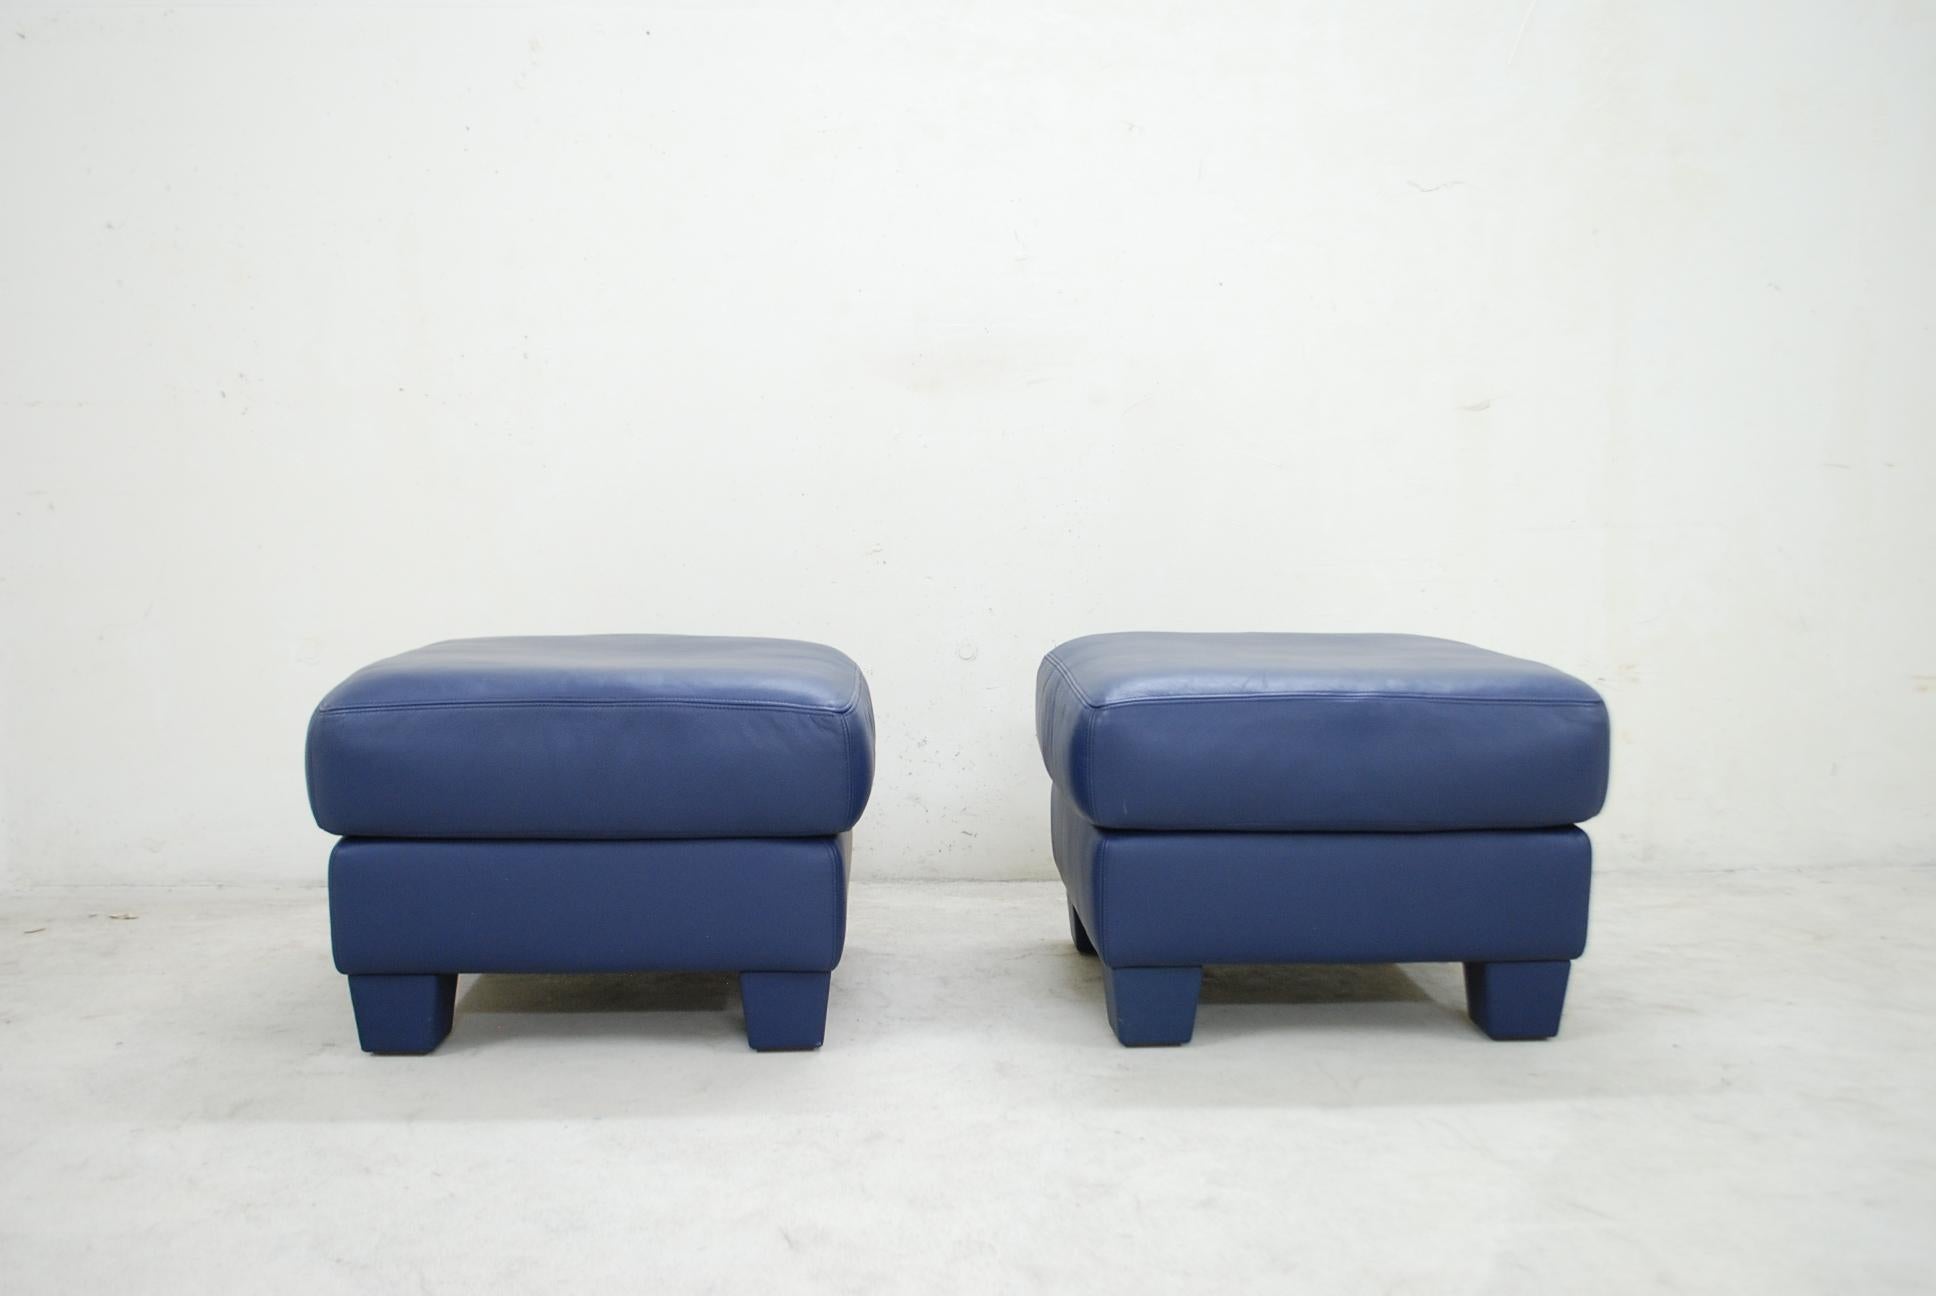 A pair of De Sede leather ottoman model DS 17.
The leather is the DS living semi aniline leather in blue color.
Great comfort and a Classic timeless design by De Sede.
In a very good condition.
 

 